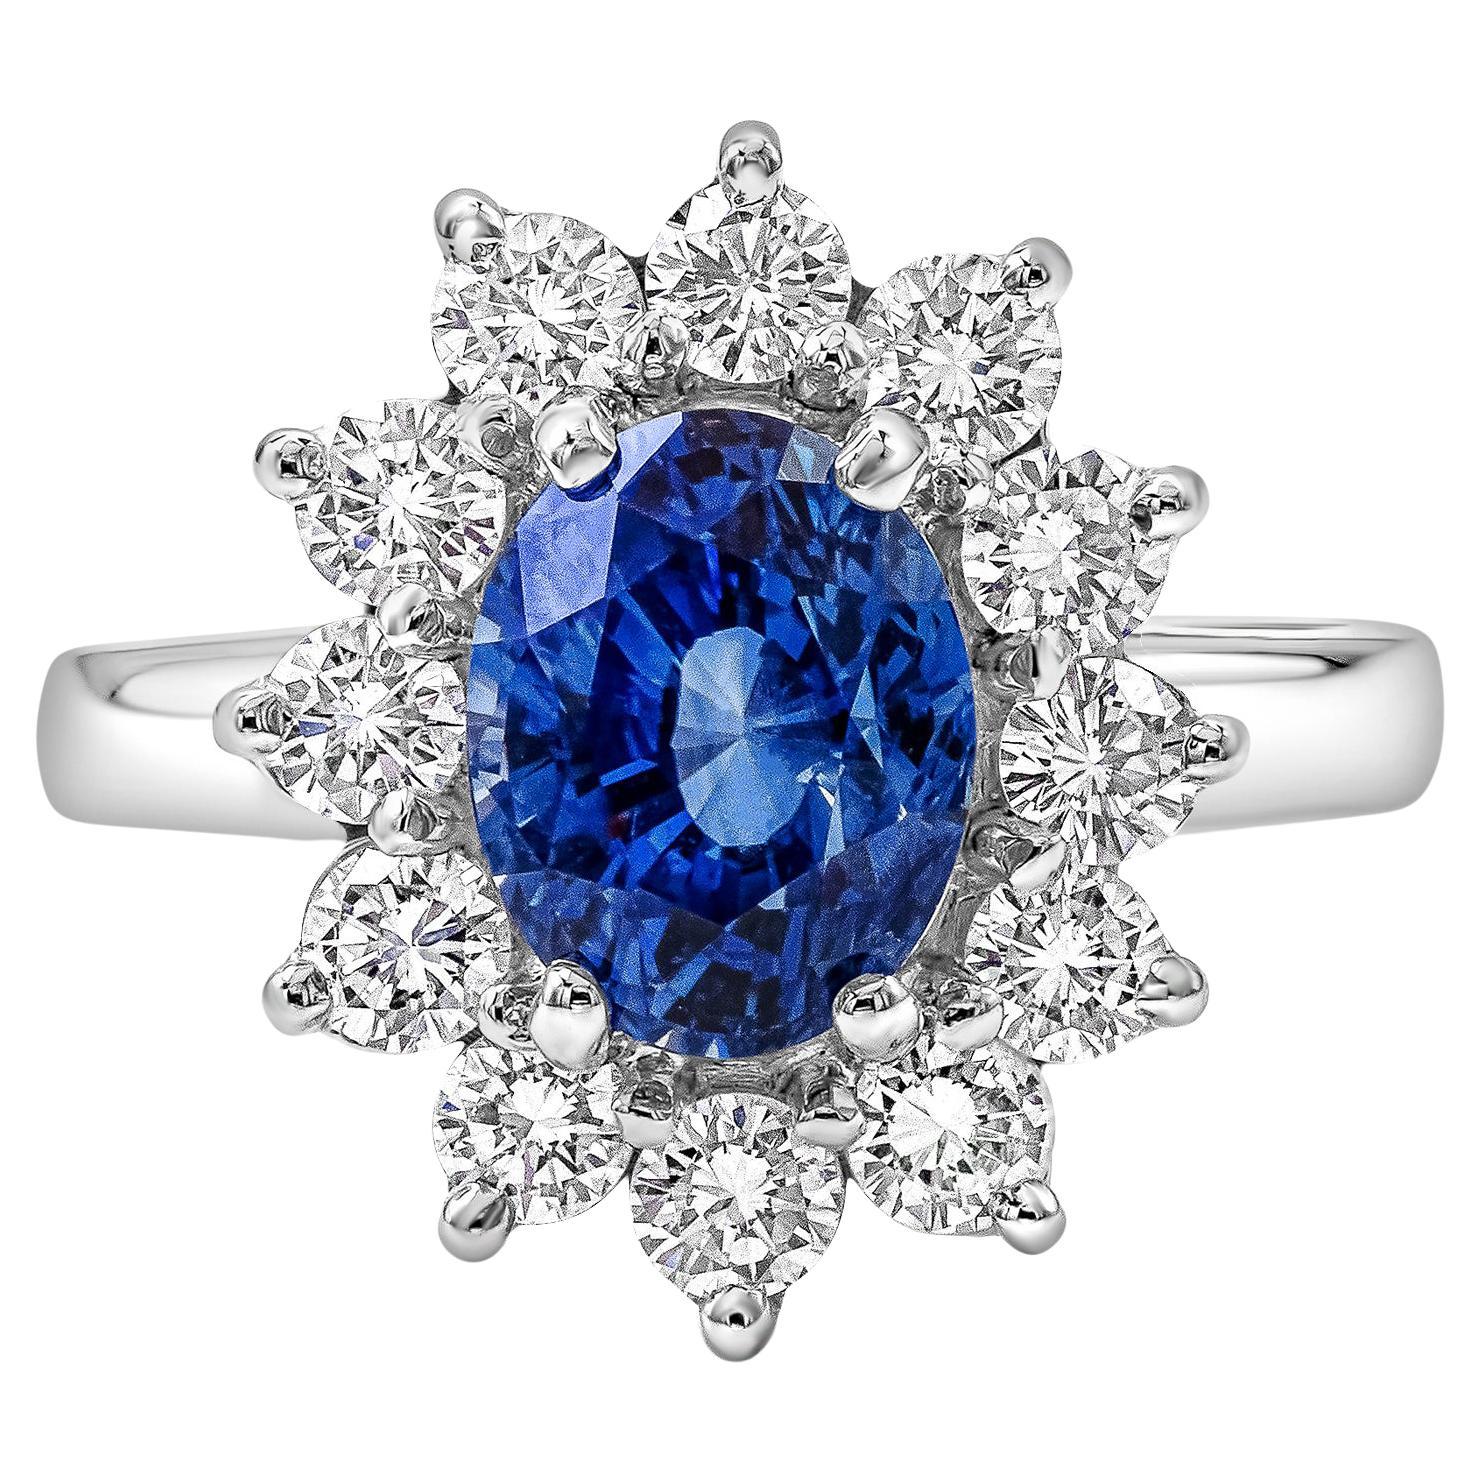 GIA Certified 3.90 Carats No-Heat Sapphire & Diamond Halo Floral Engagement Ring